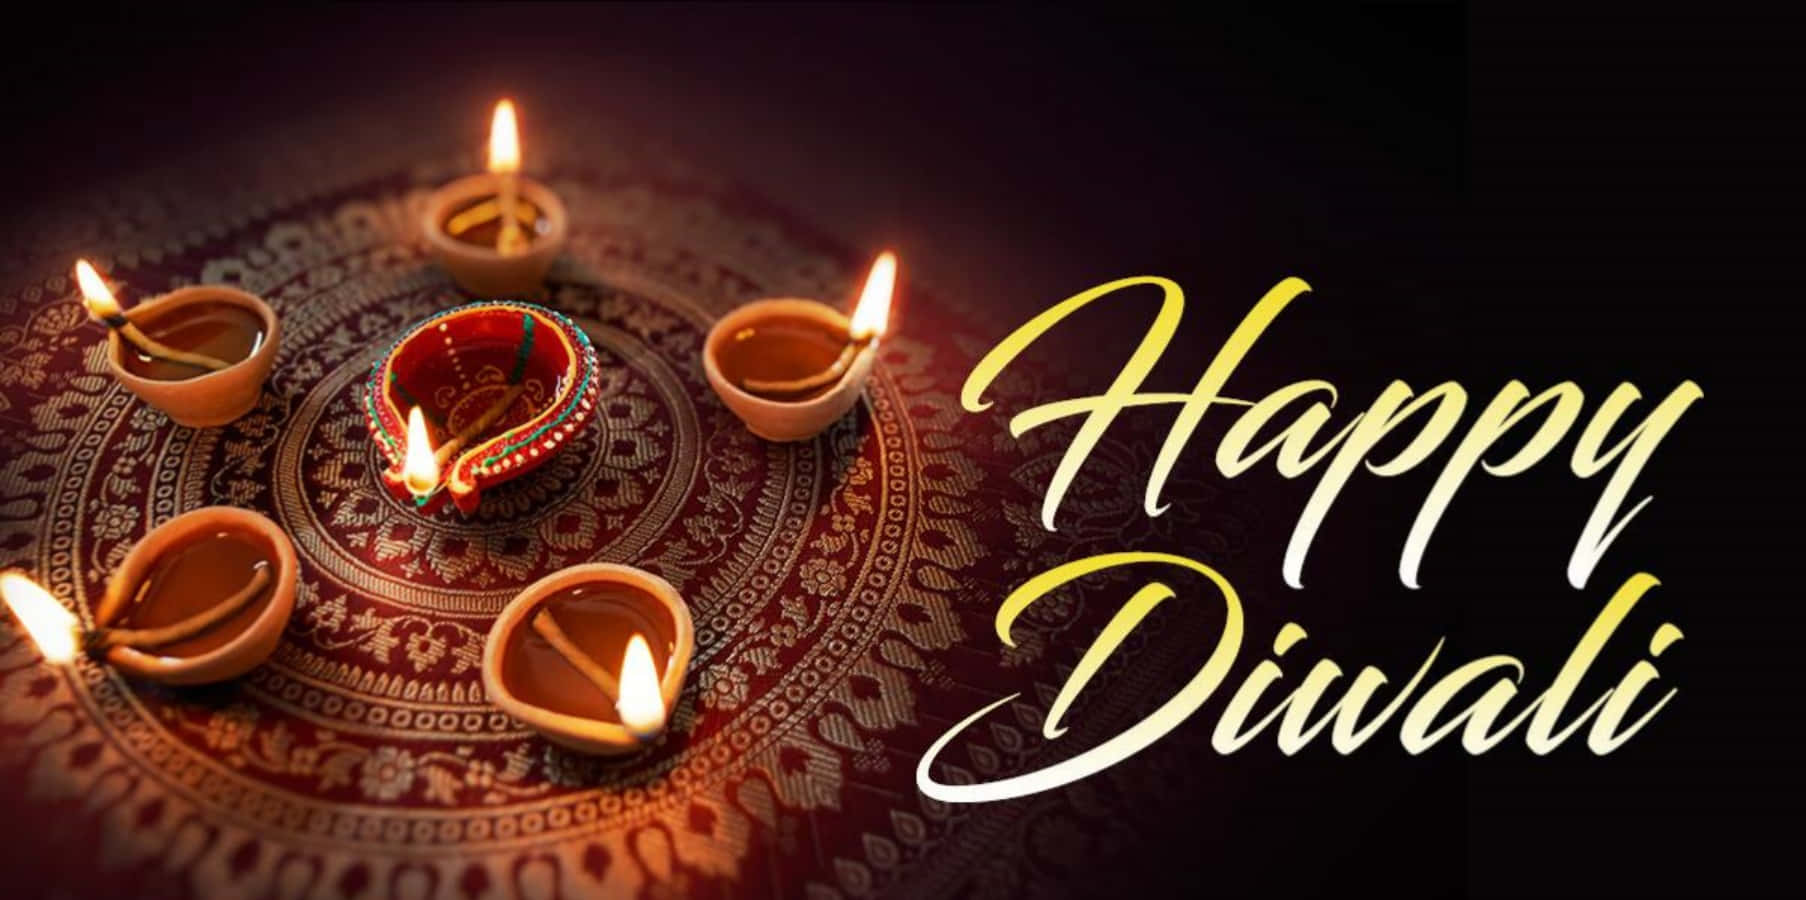 Happy Diwali Images With Candles And A Message